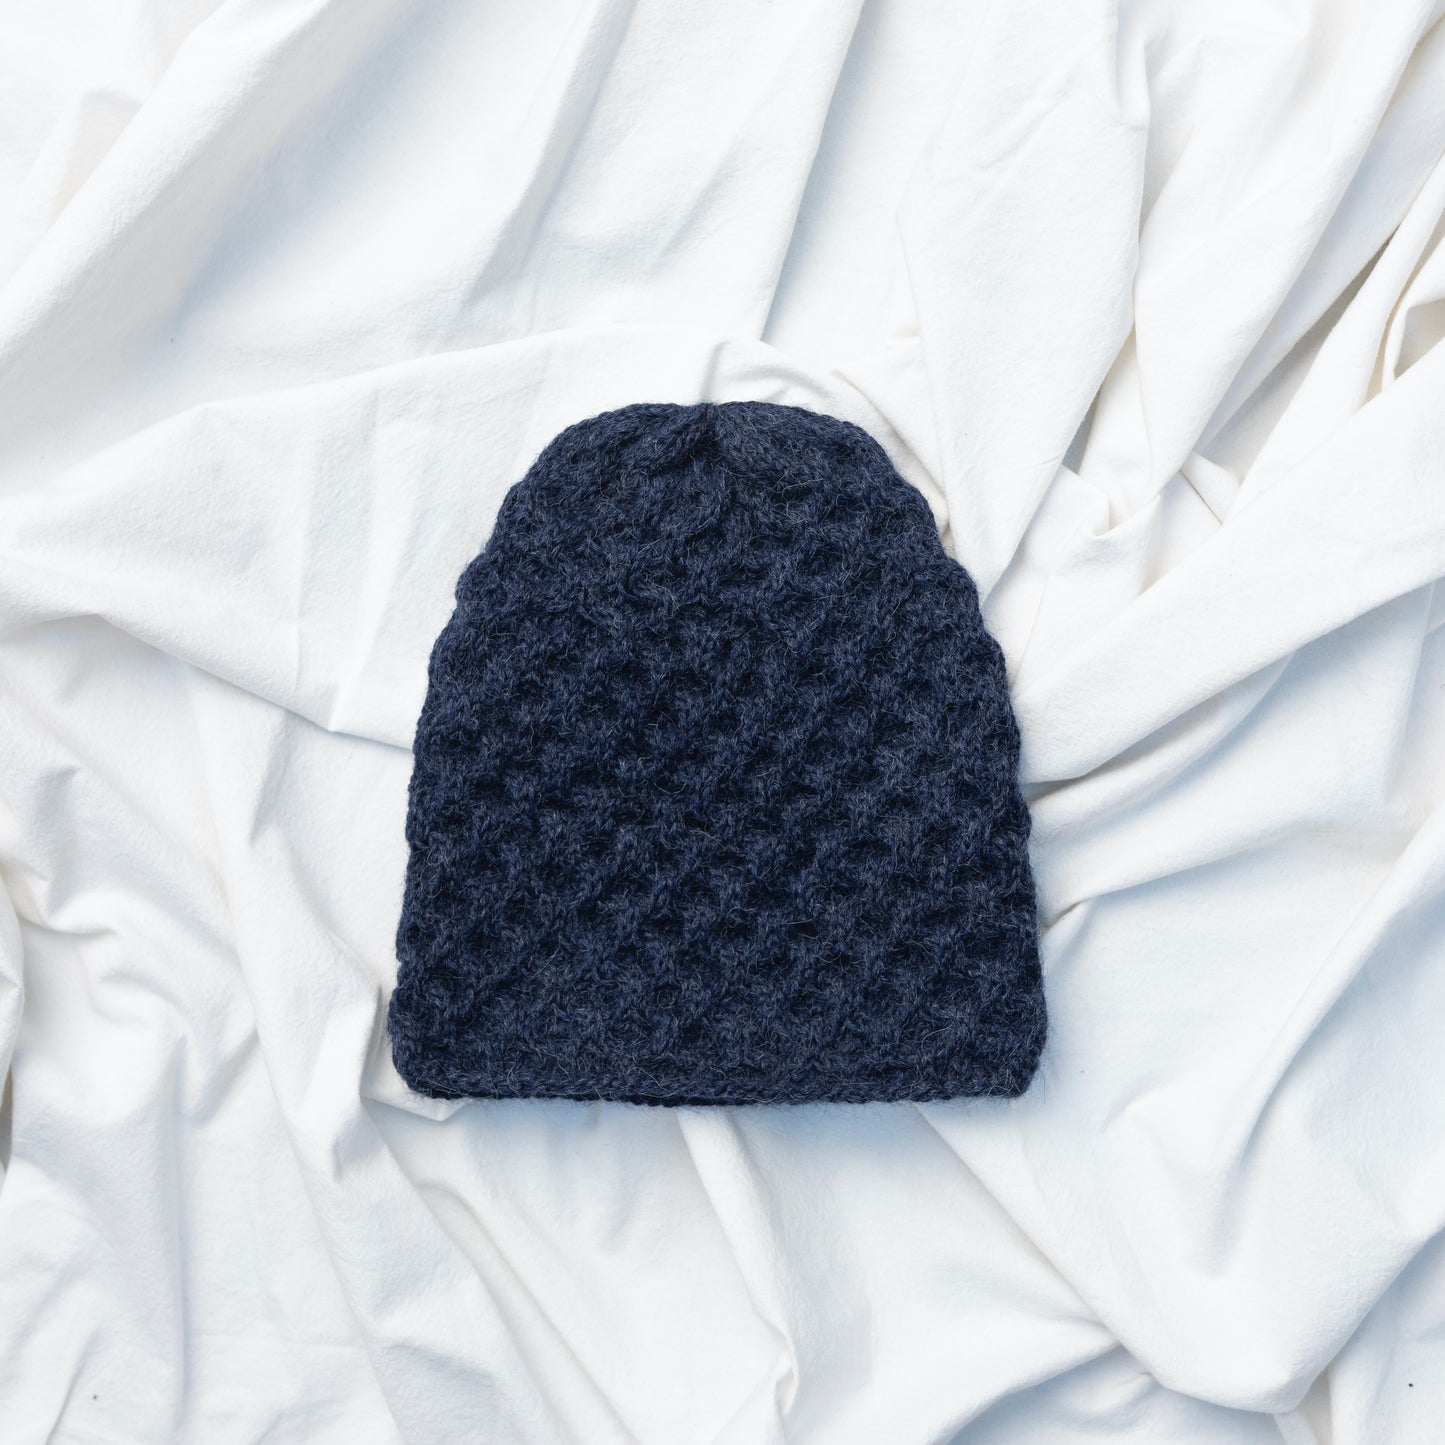 Textured hand knitted navy blue coloured beanie hat made from alpaca wool 